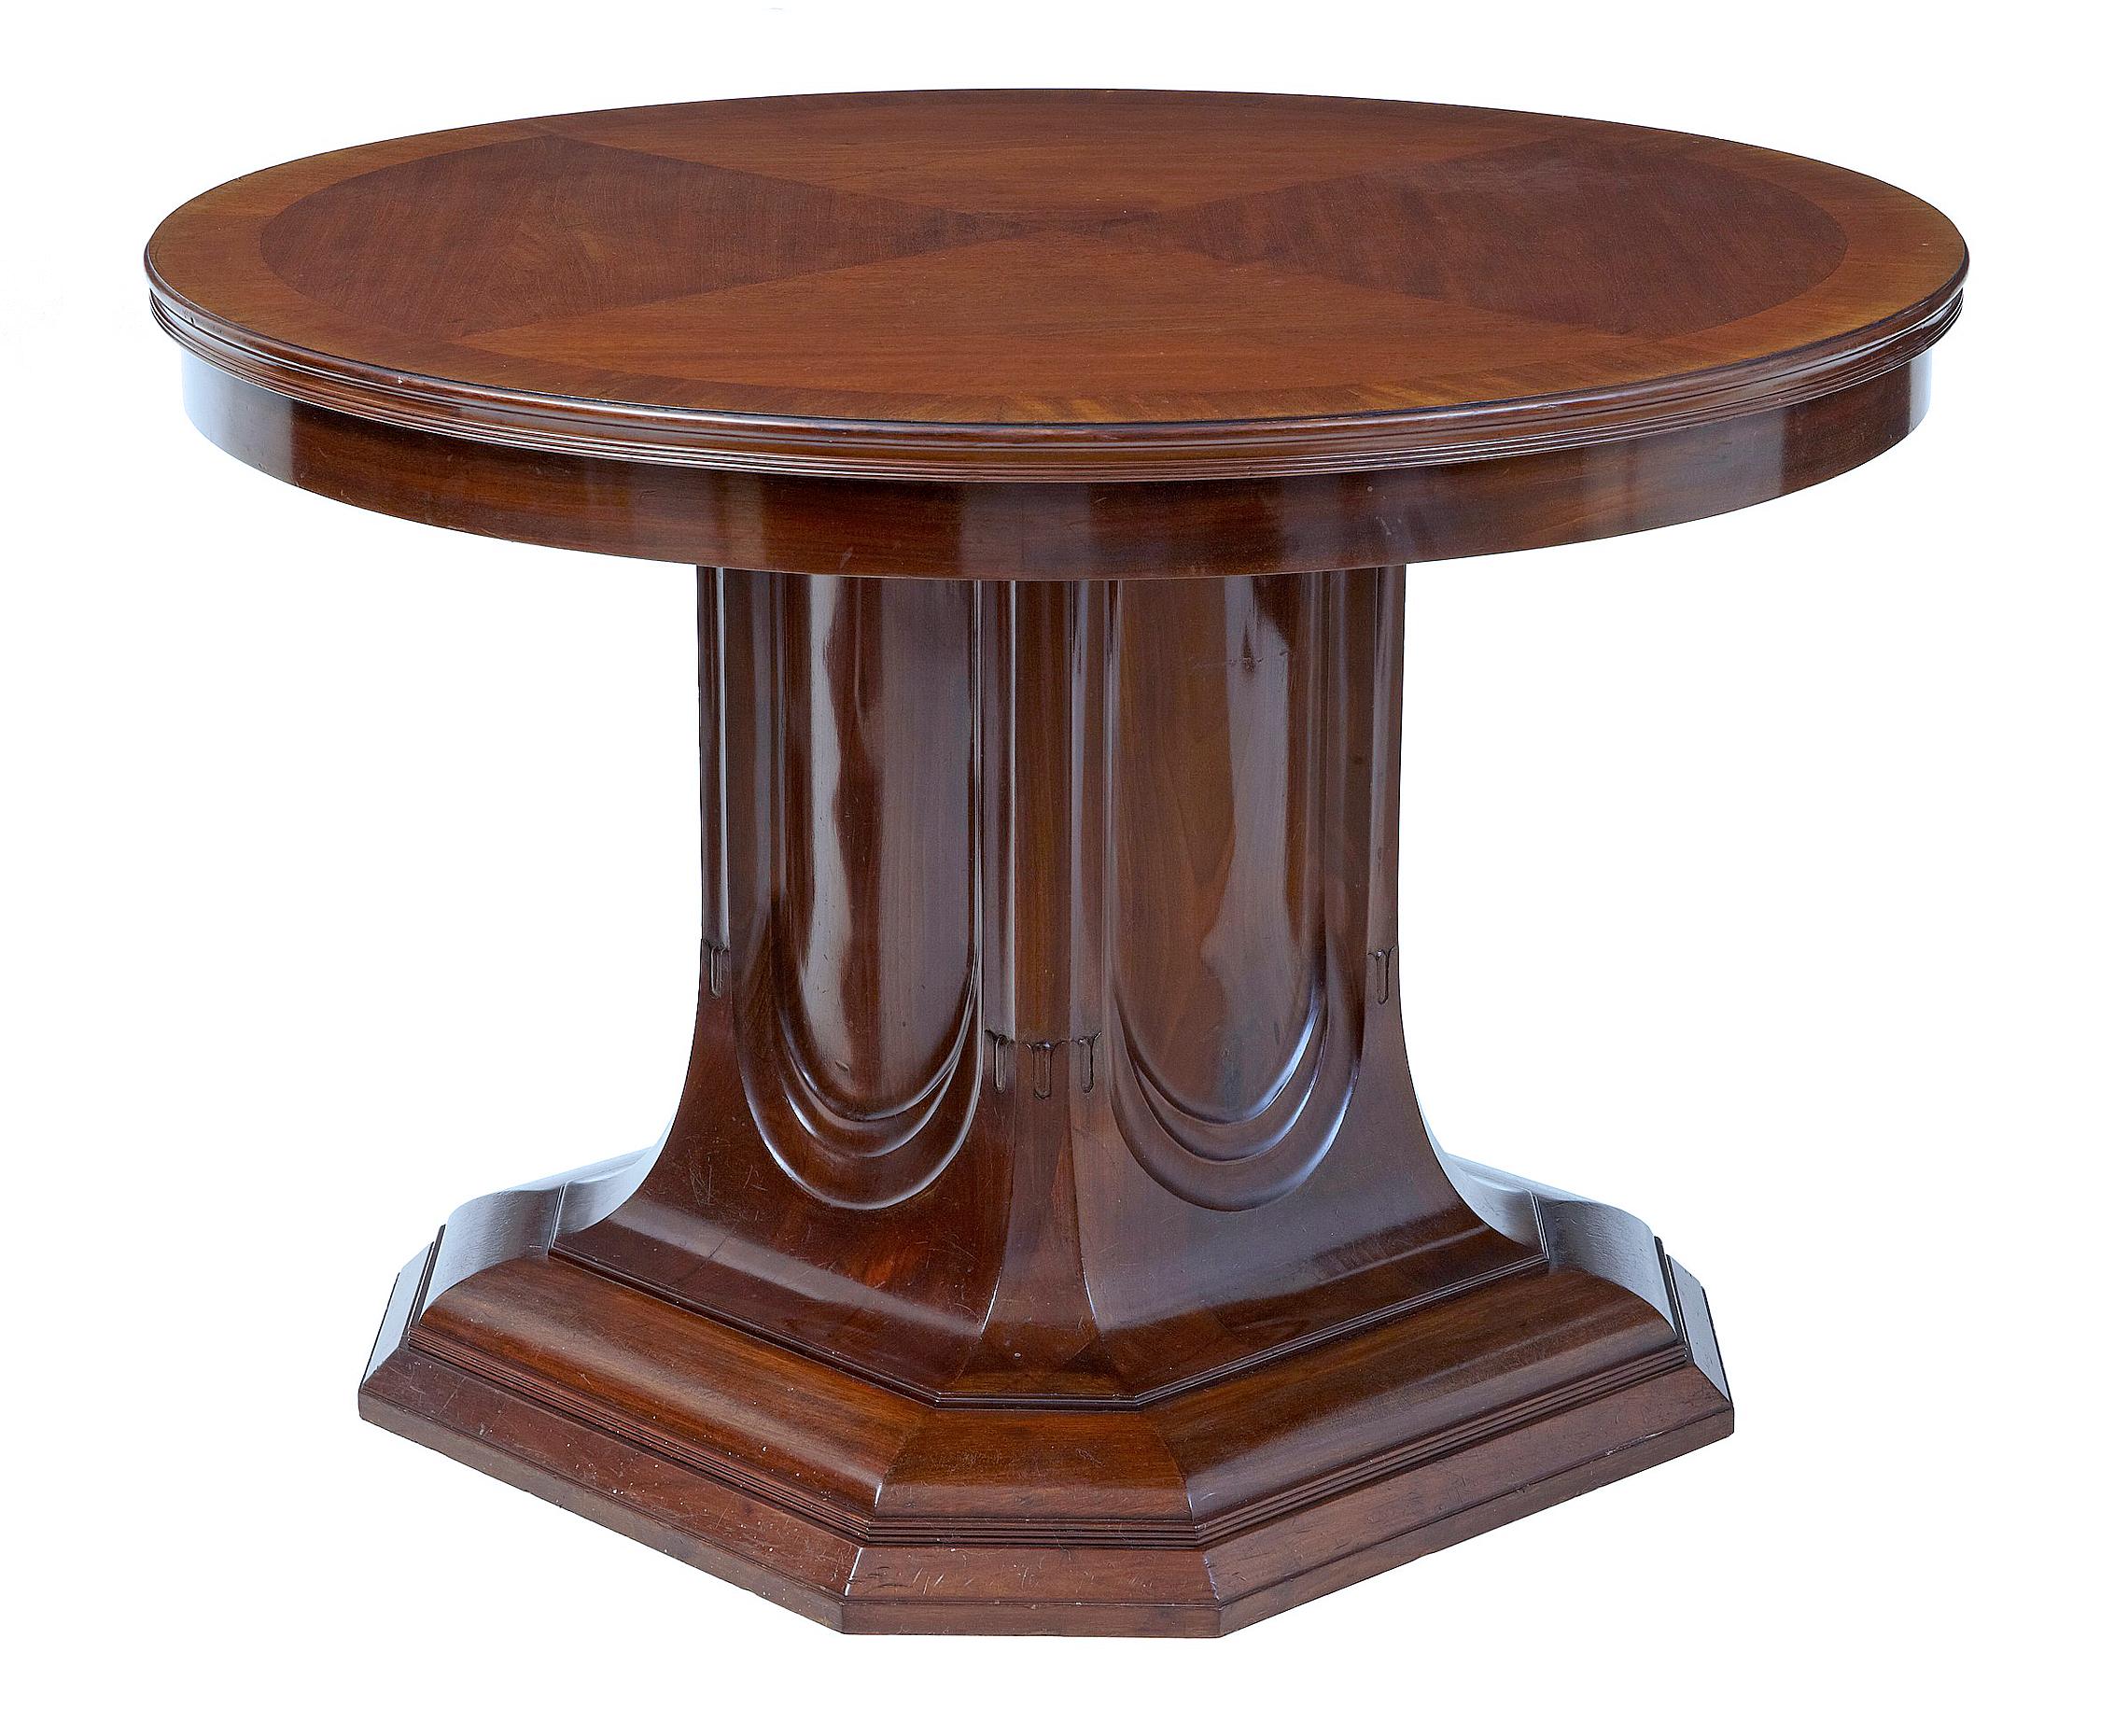 19th century mahogany pedestal base center table circa 1890.

Circular top which has been quarter veneered with a cross banded outer edge. Supported by a unusual architectural 4 sided pedestal base, standing on a 8 sided plinth base.

Some